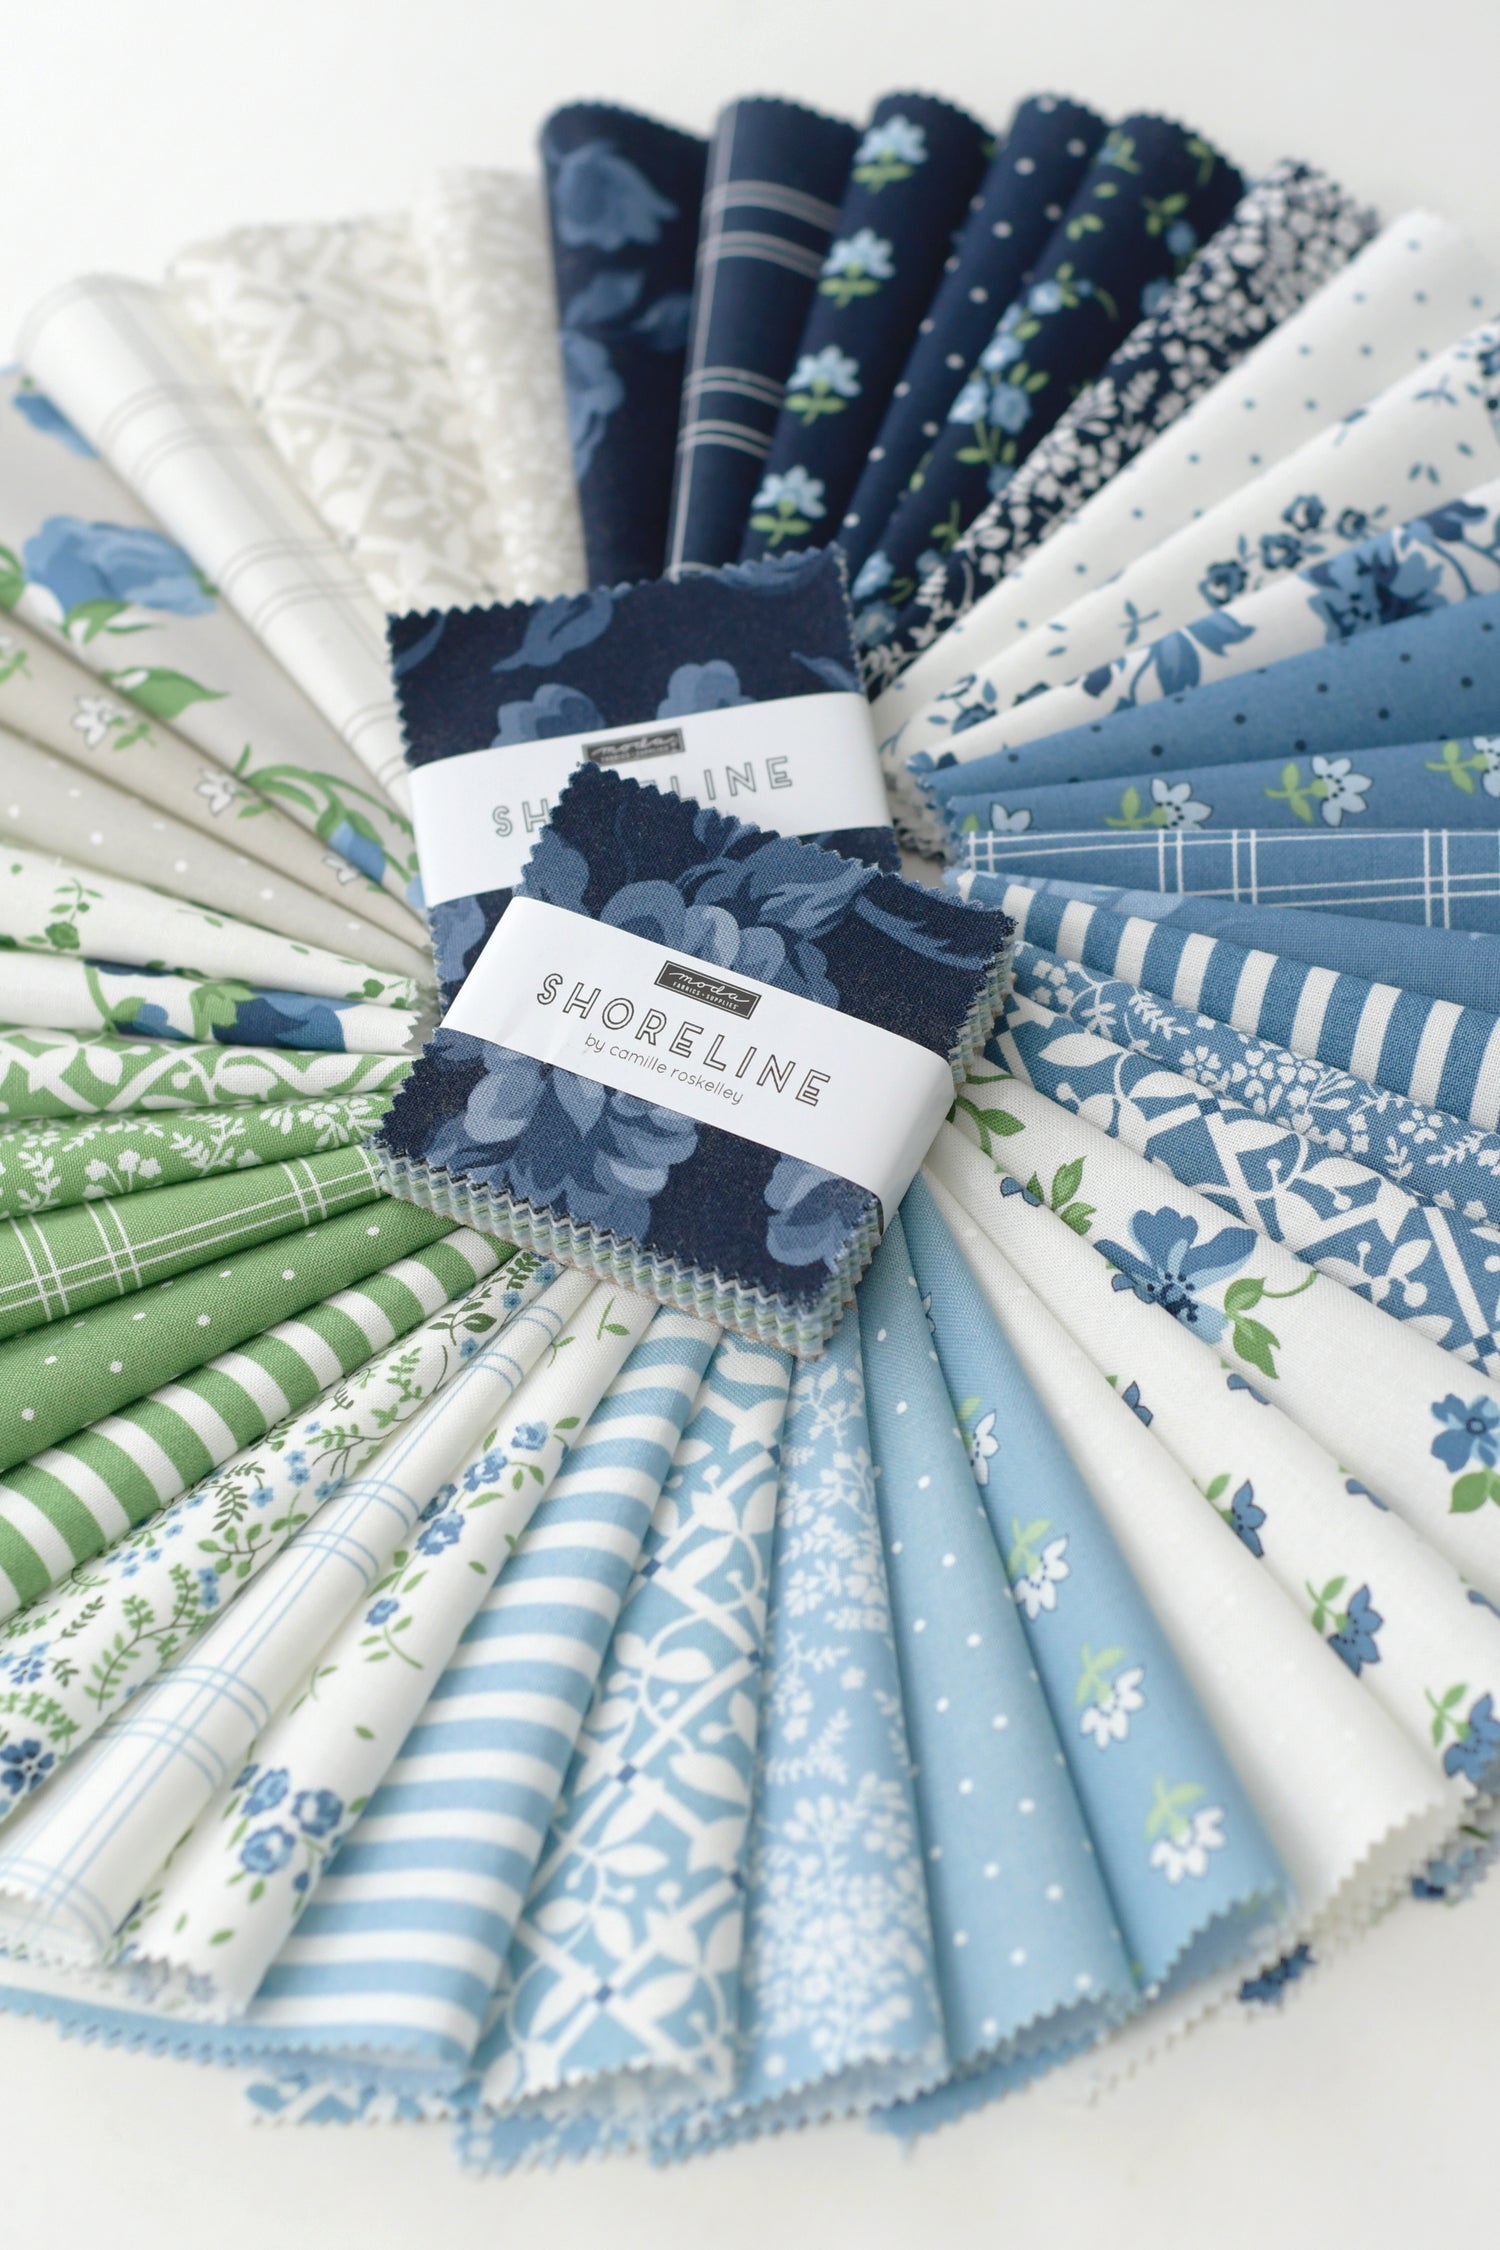 Shoreline by Camille Roskelley for Moda Fabrics